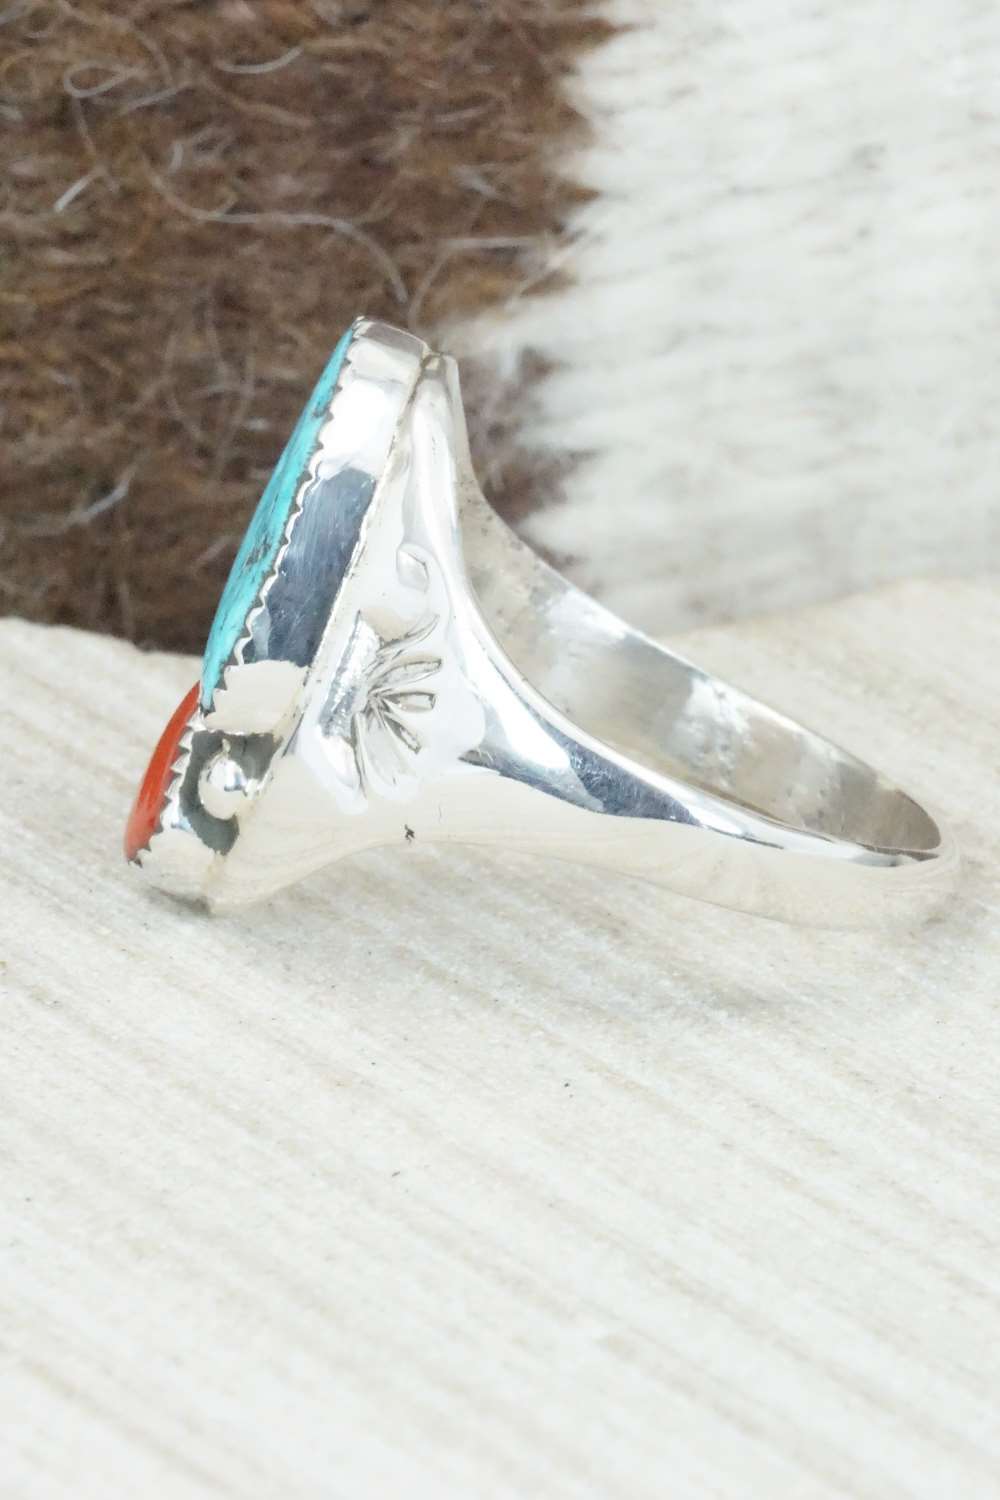 Turquoise, Coral & Sterling Silver Ring - Pauline Nelson - Size 14.75